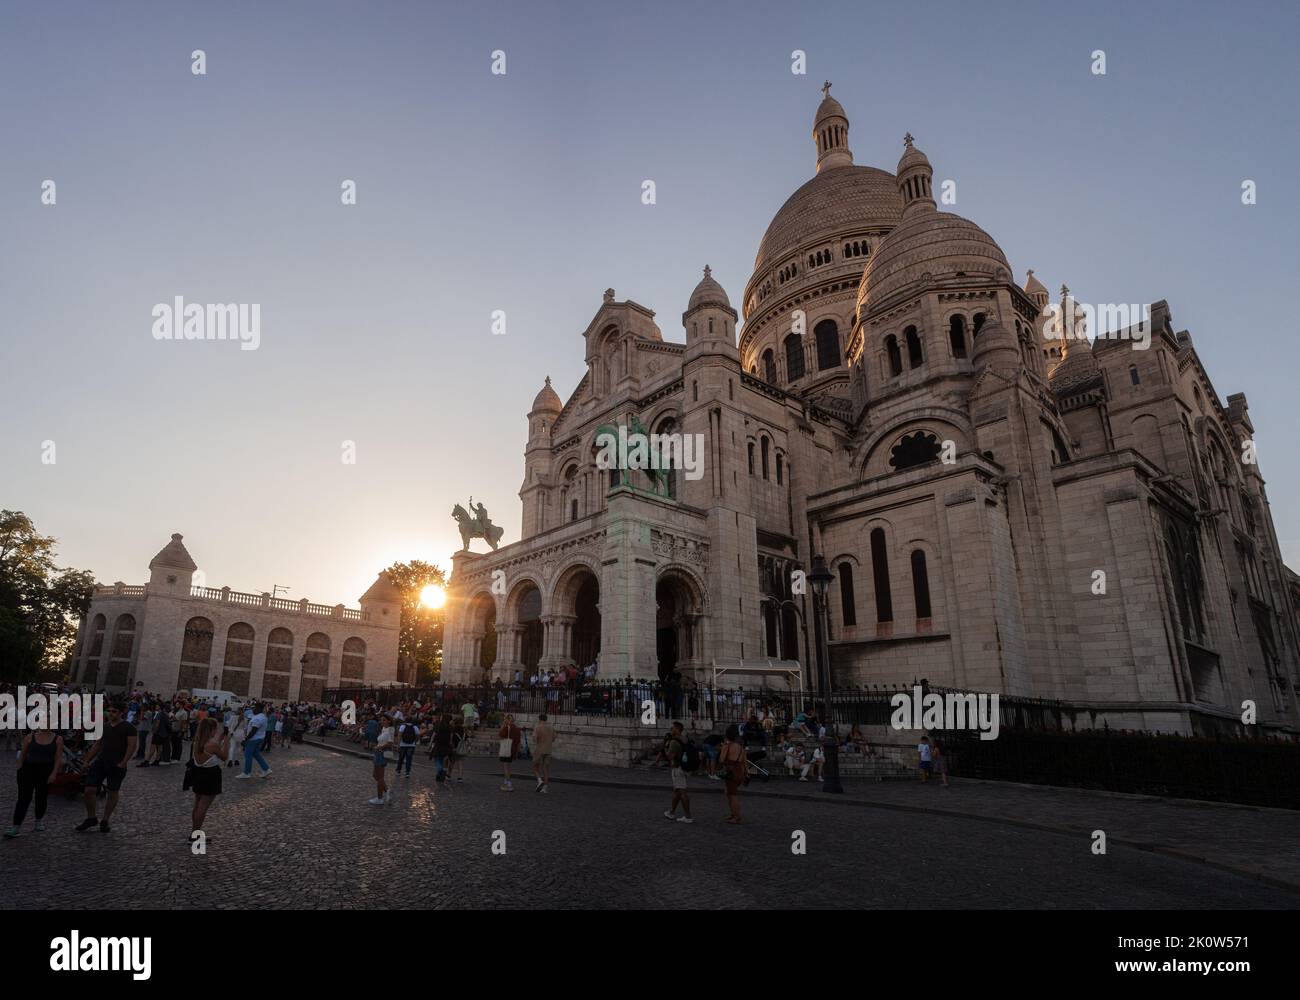 Paris, France - July, 15: Basilica of the Sacred Heart at sunset, commonly known as Sacre-Cœur Basilica on July 15, 2022 Stock Photo